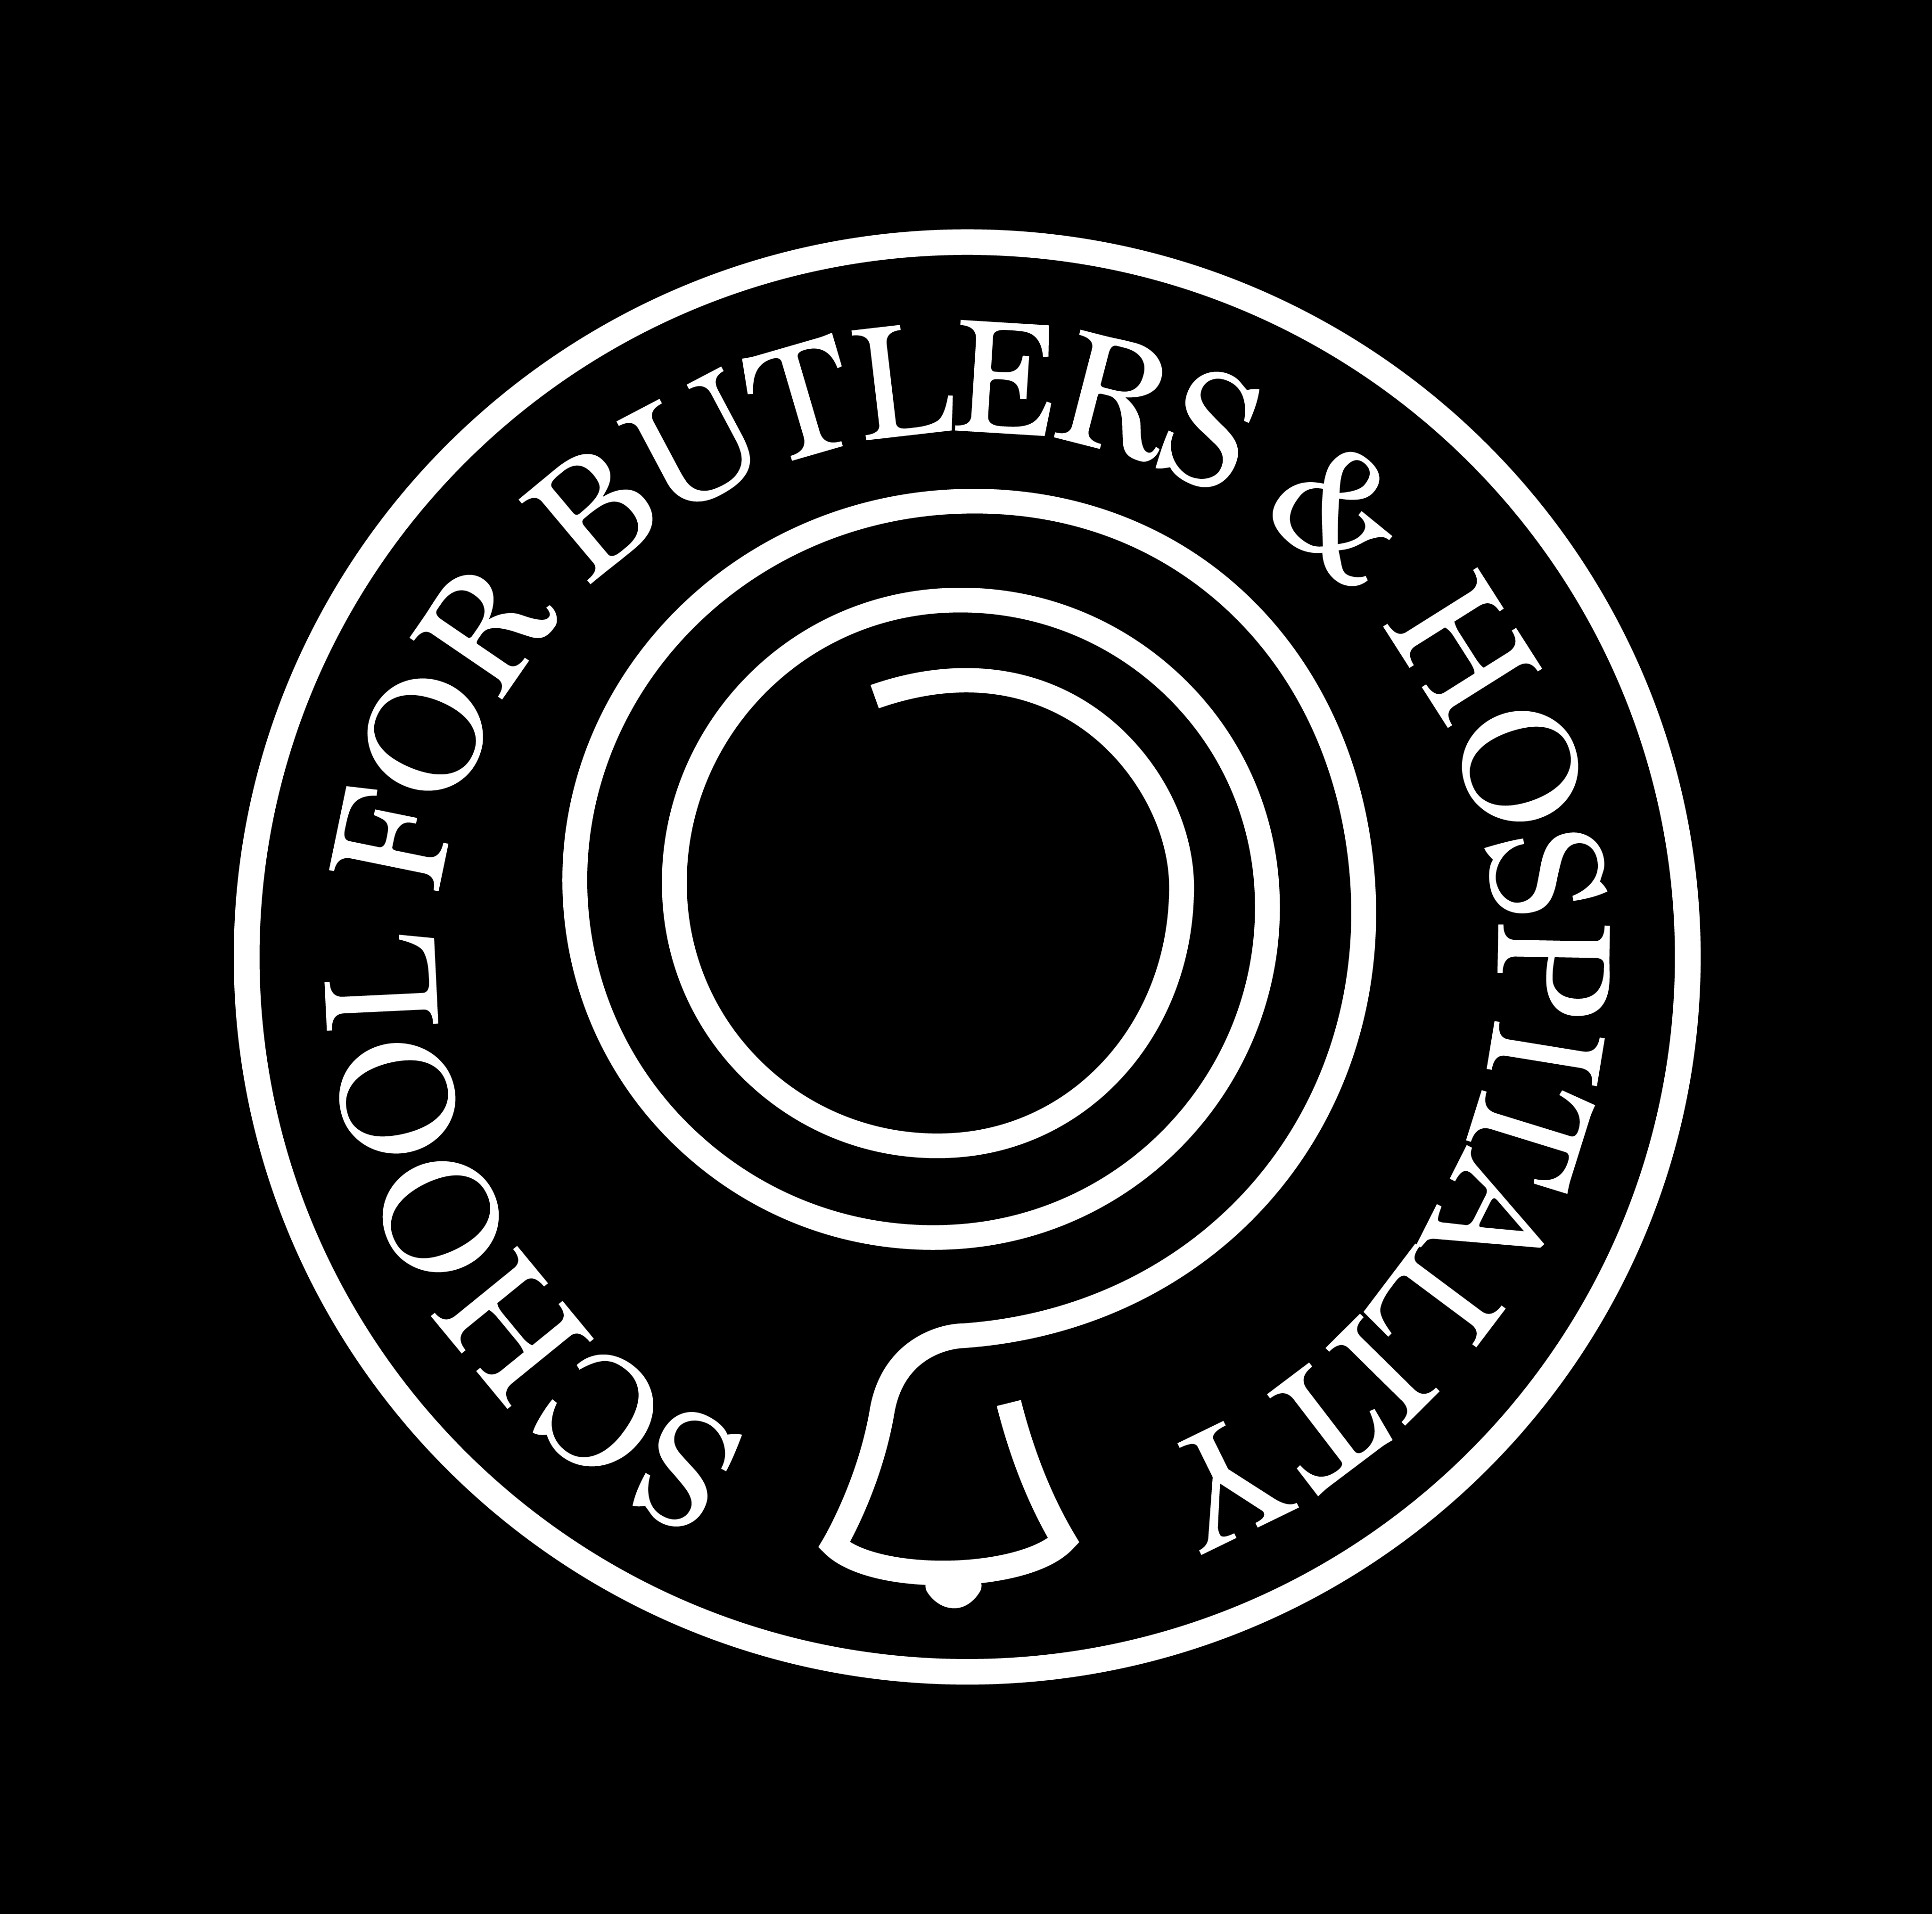 School for Butlers and Hospitality